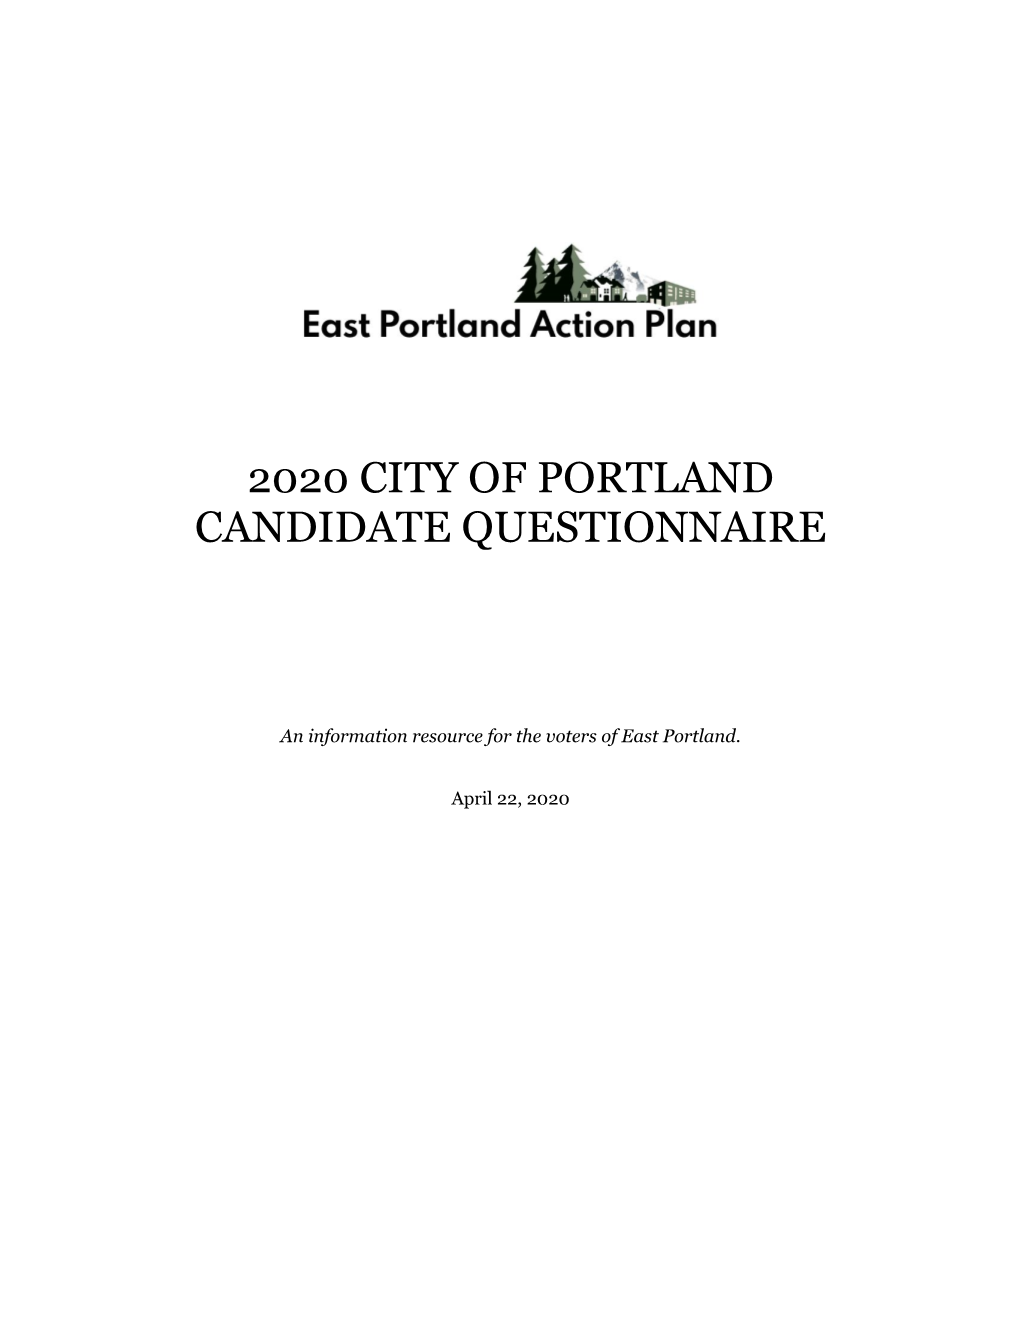 2020 City of Portland Candidate Questionnaire